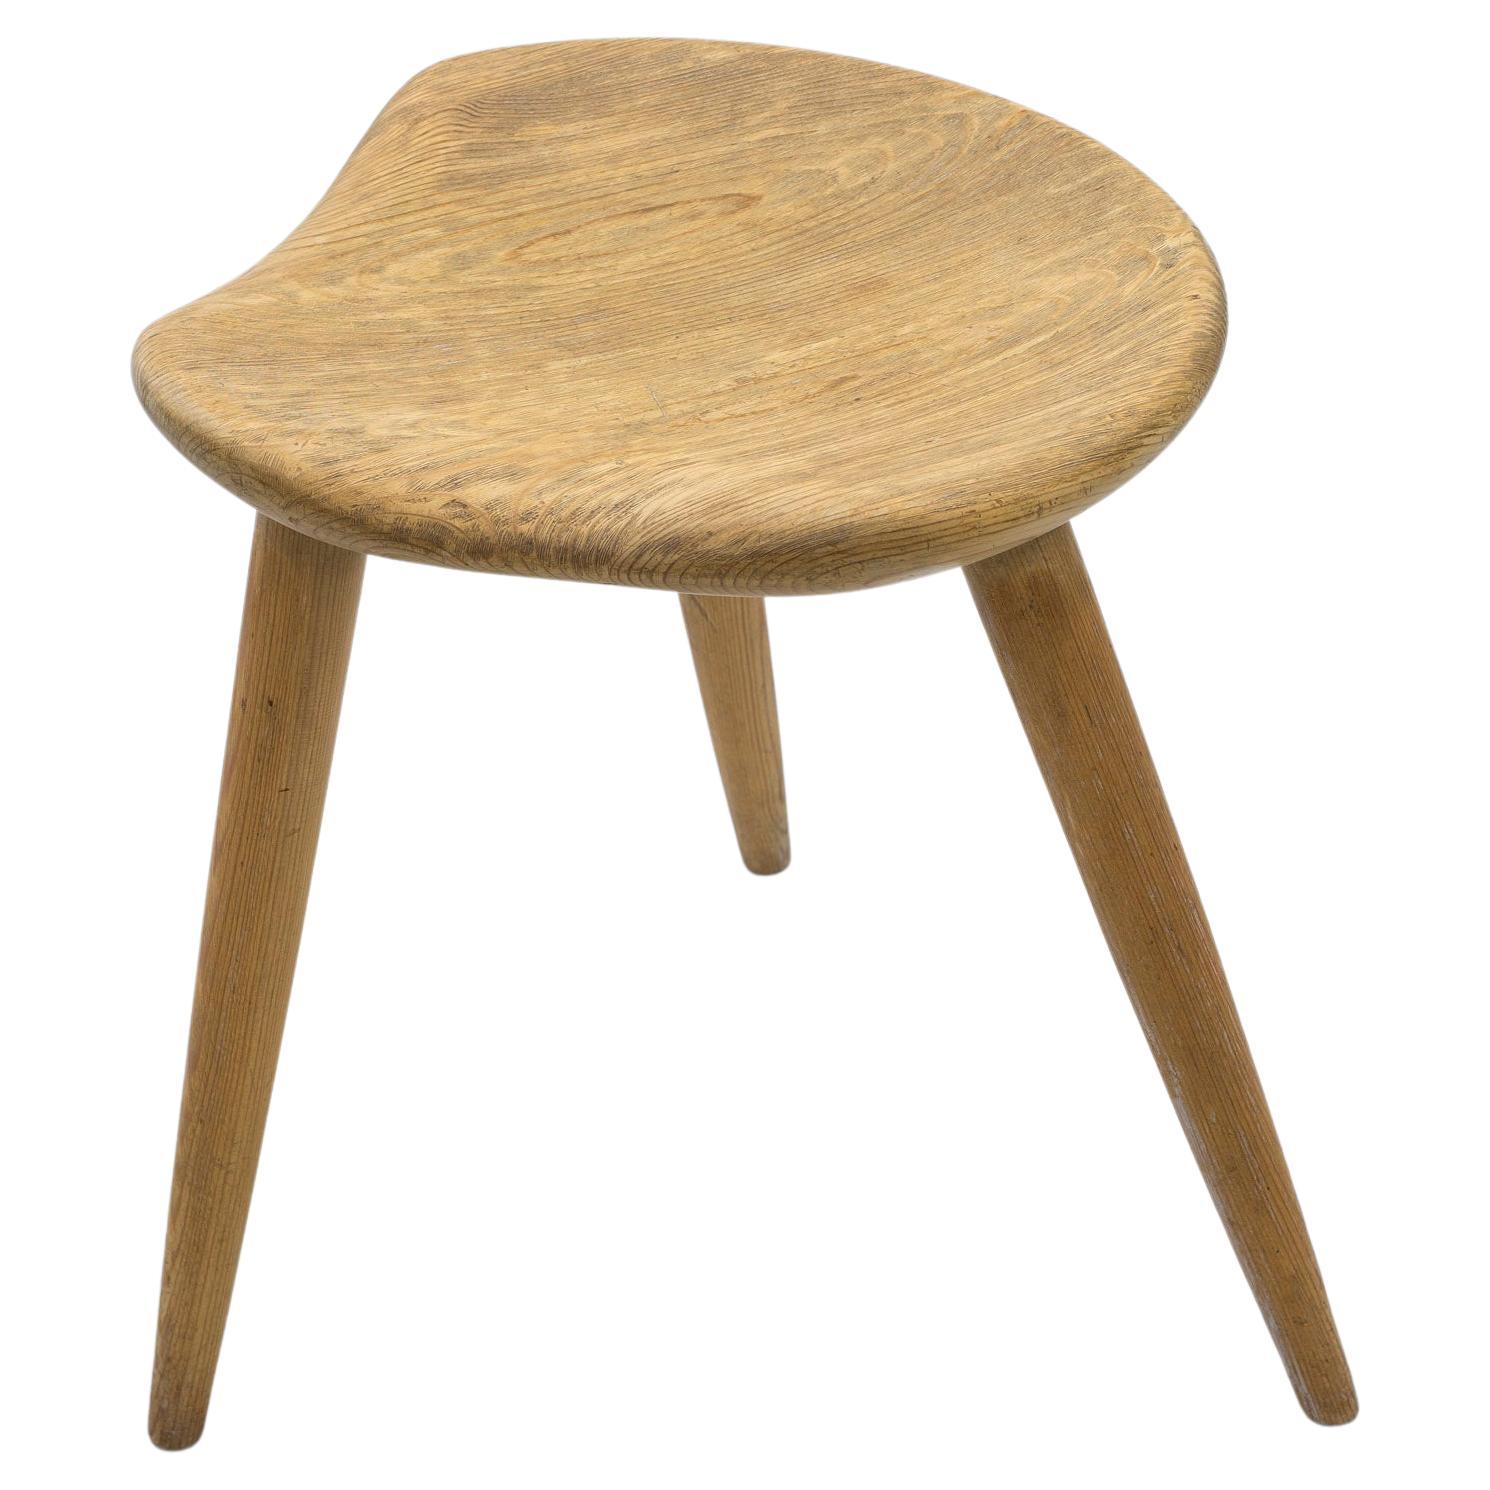 Three legged pine stole made in Norway by Norsk Husflid, circa 1950s. Made from solid pine with a nicely hand shaped seat. Good vintage condition with patina and wear consistent with age and use.



Designer: Unknown

Manufacturer: Norsk